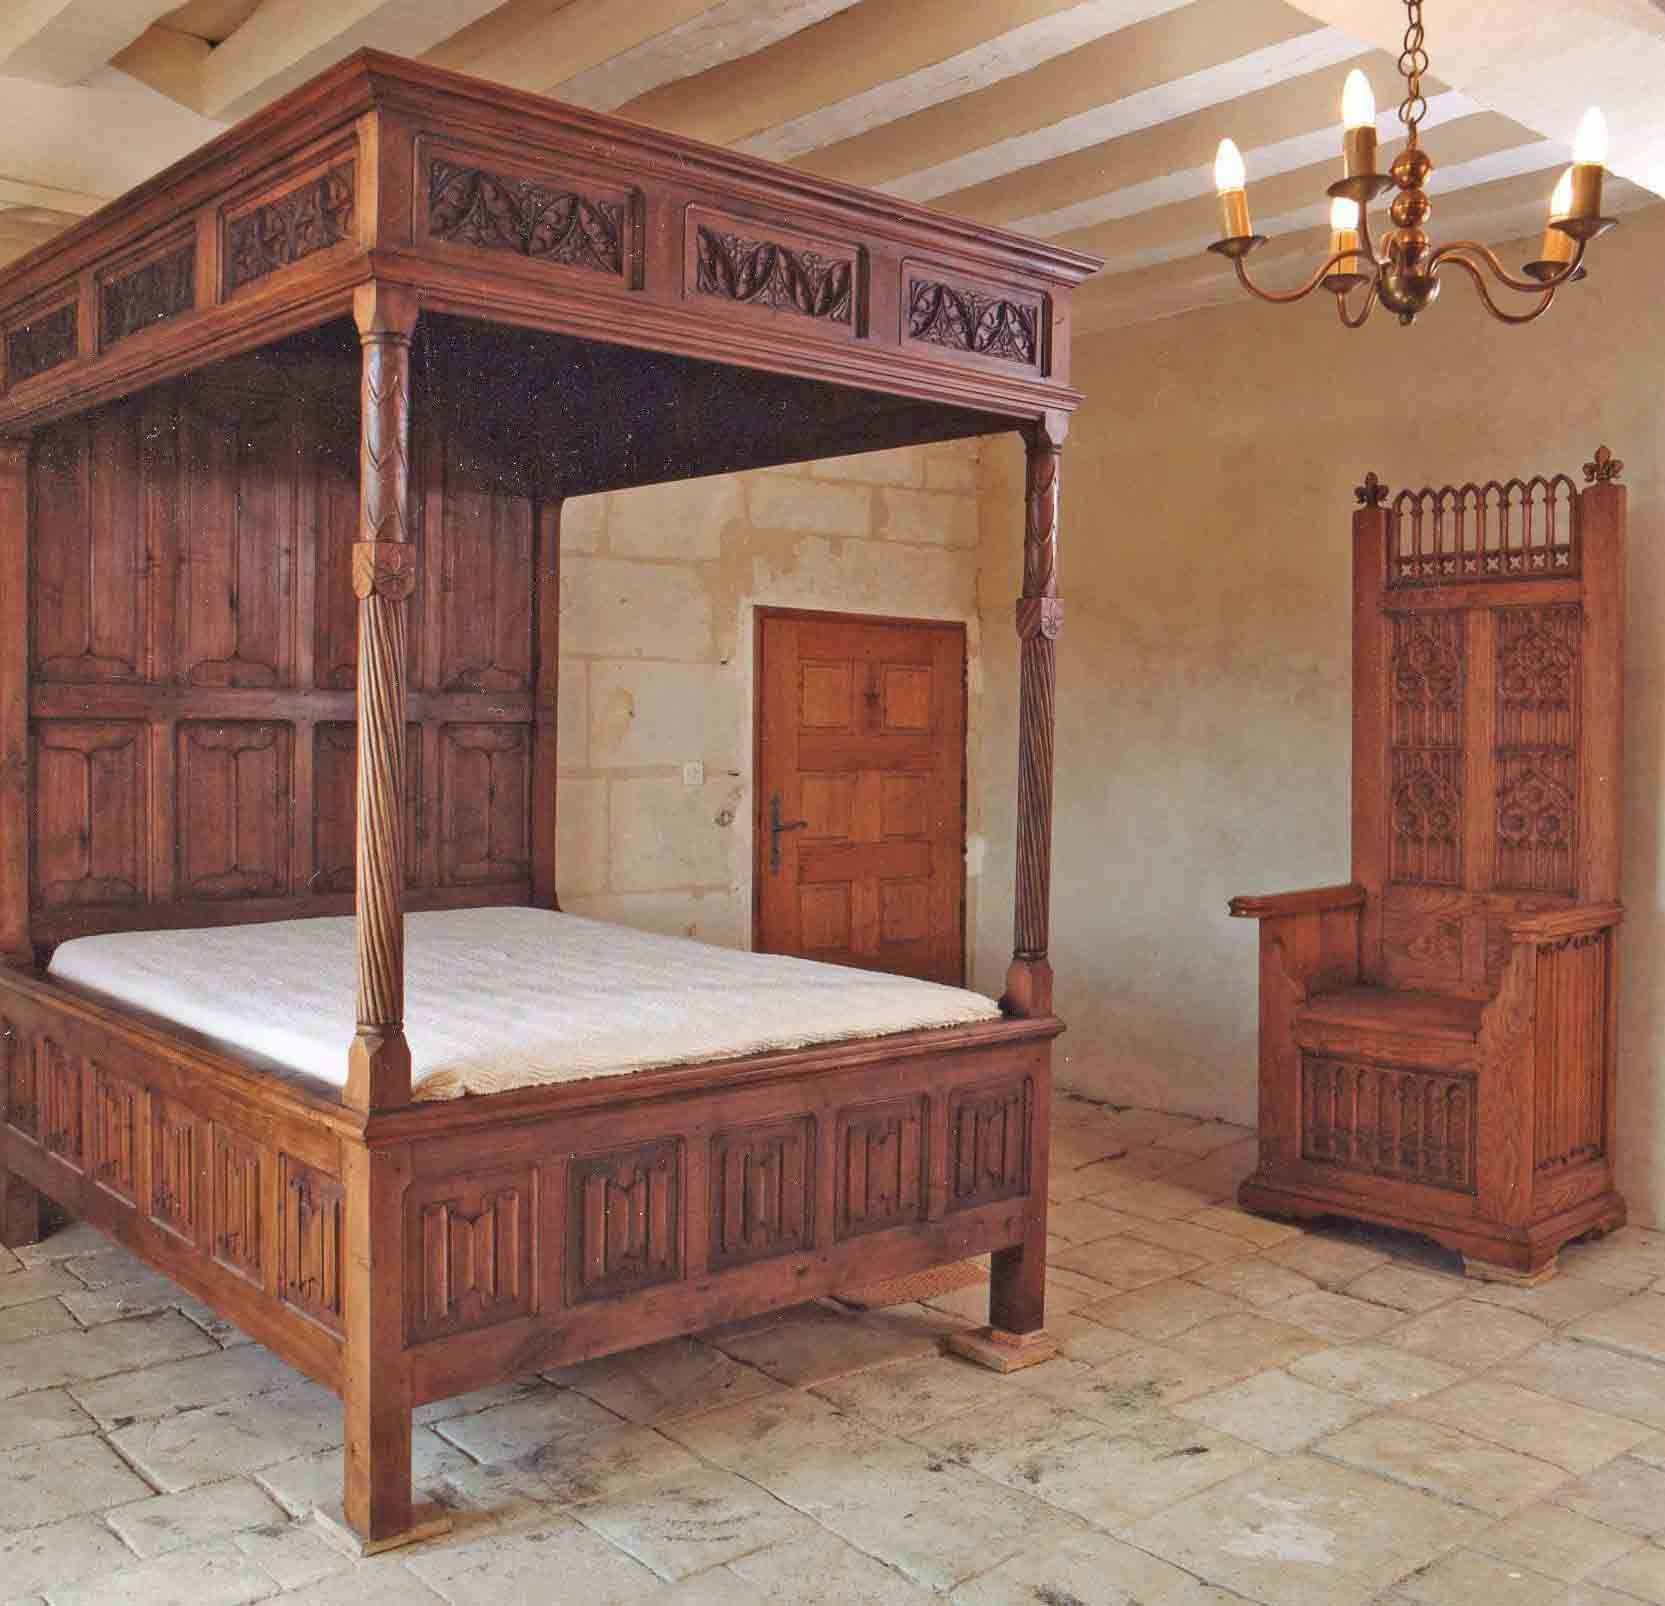 3 Furnishing 26 Medieval Medieval Furniture Medieval Bed for dimensions 1665 X 1606